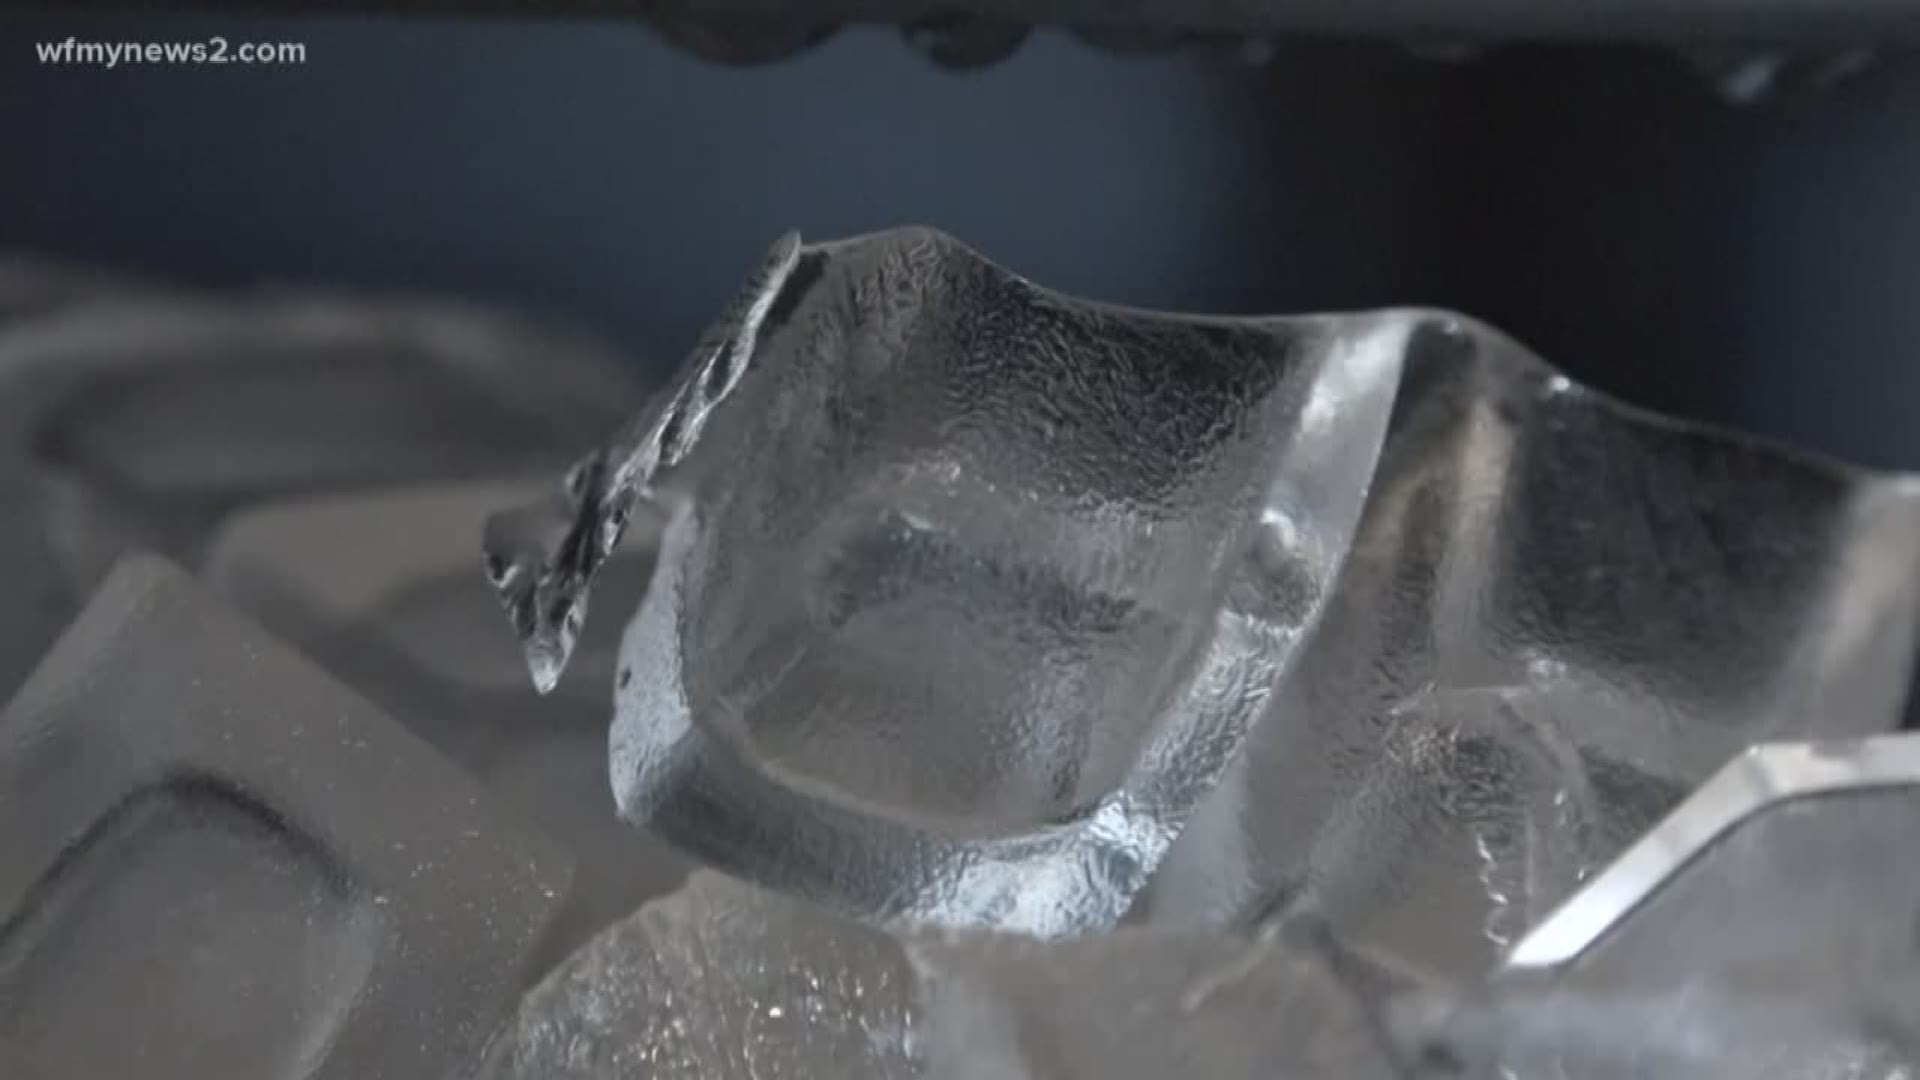 Why Chewing Ice Is Bad for Your Teeth